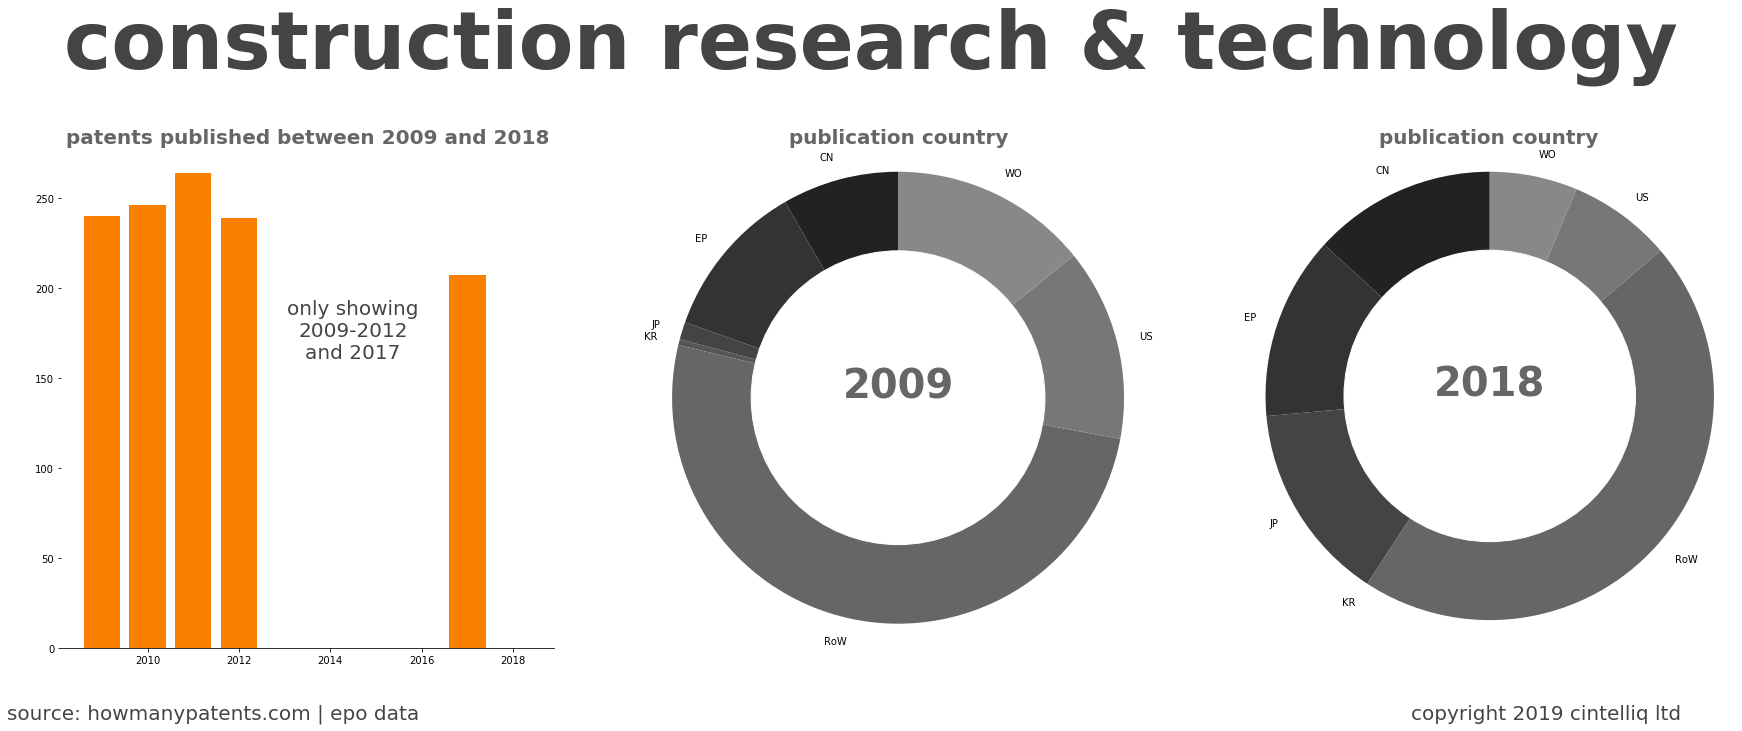 summary of patents for Construction Research & Technology